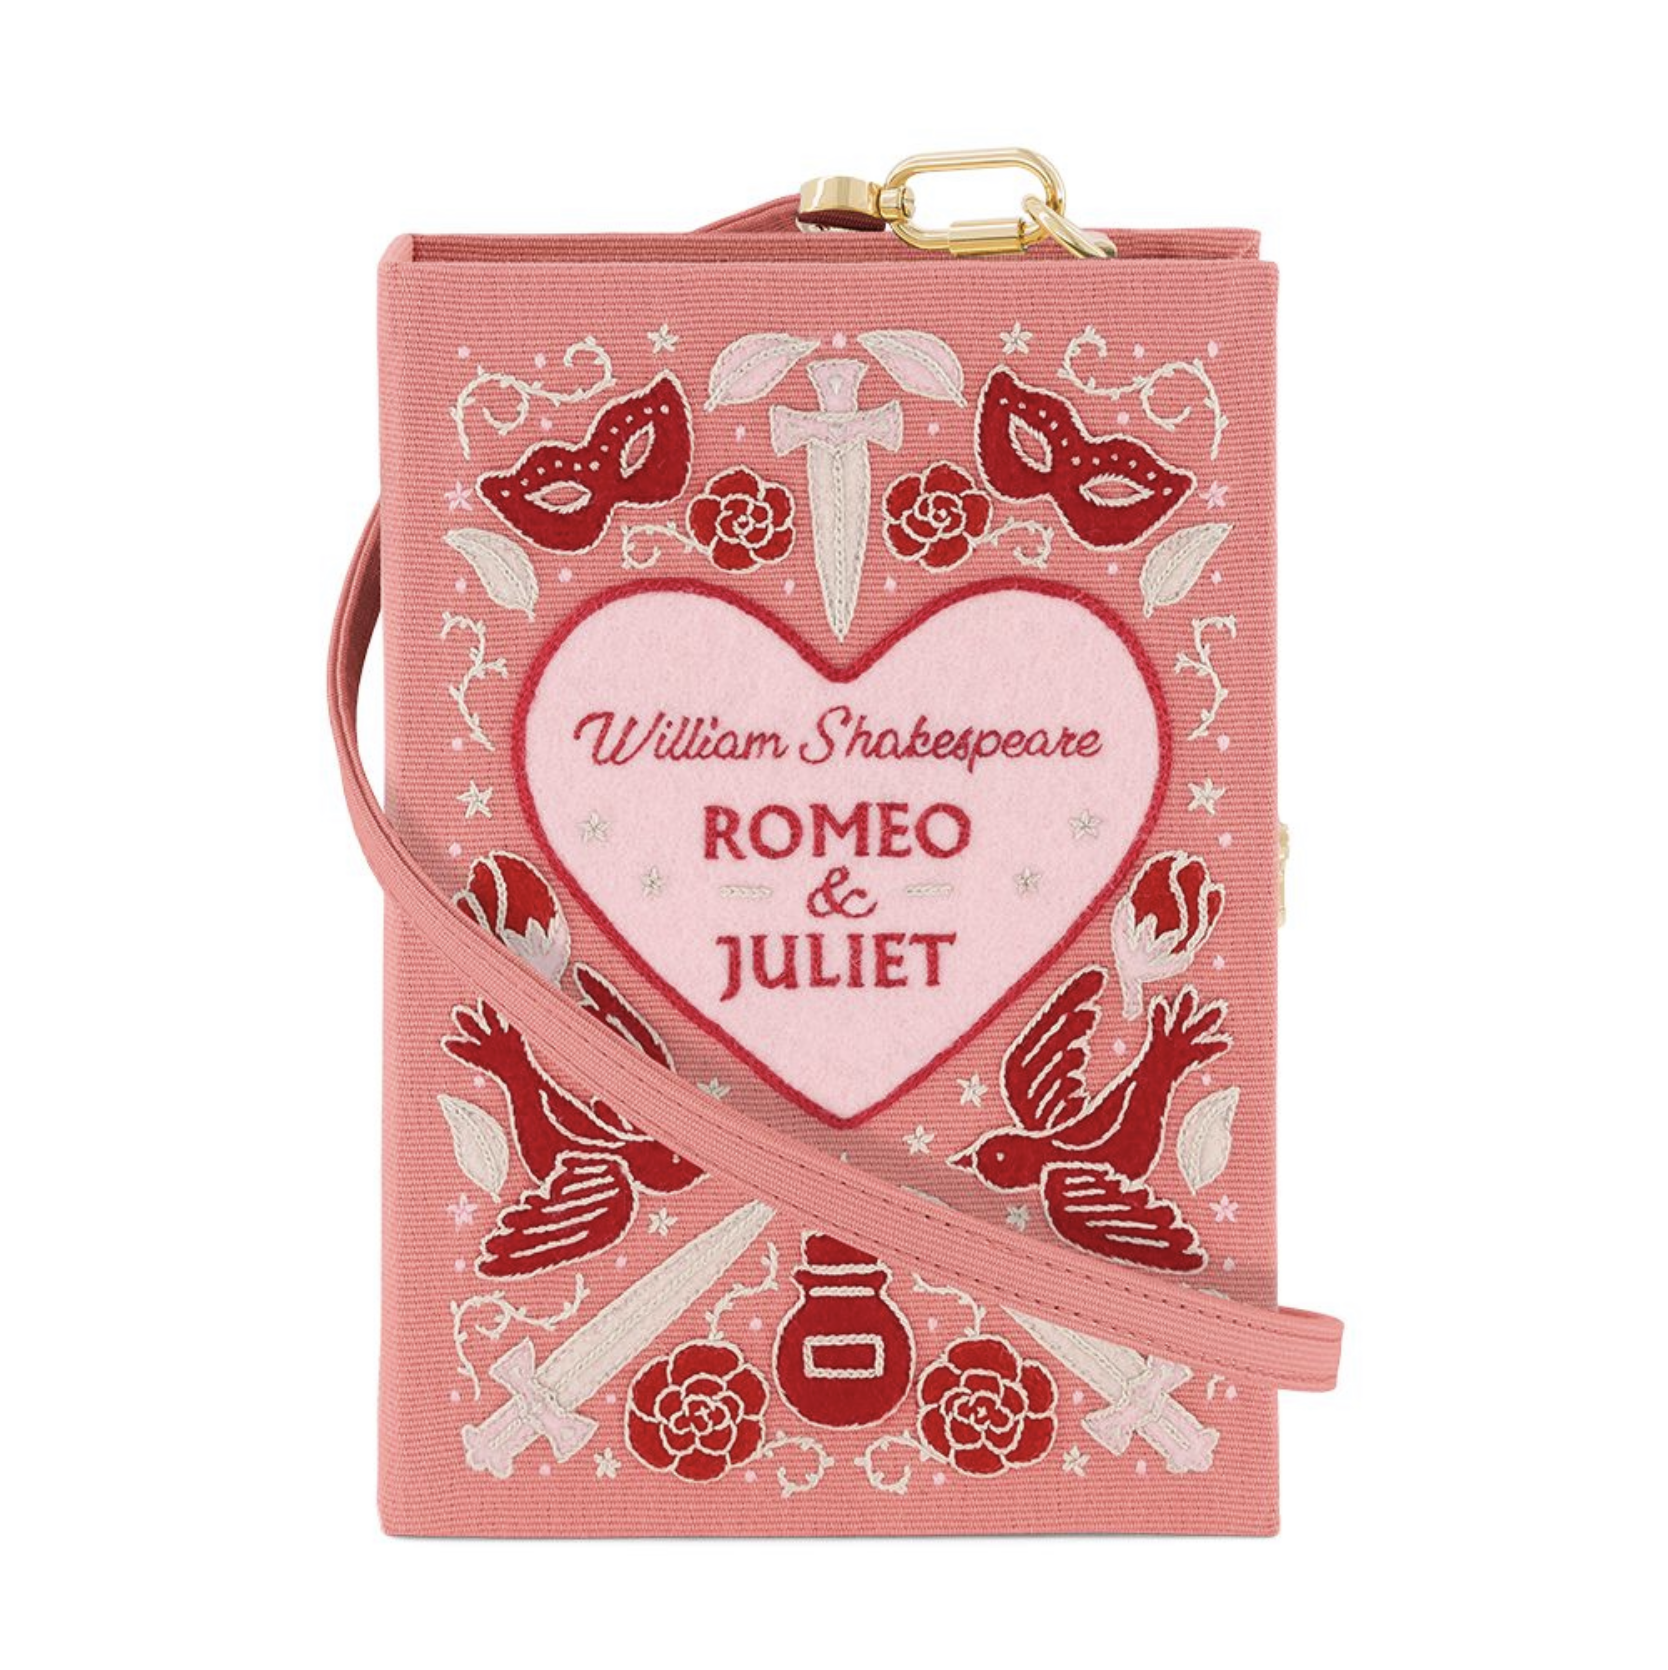 PRE-ORDER Olympia Le-Tan Romeo and Juliet Book Clutch Strapped